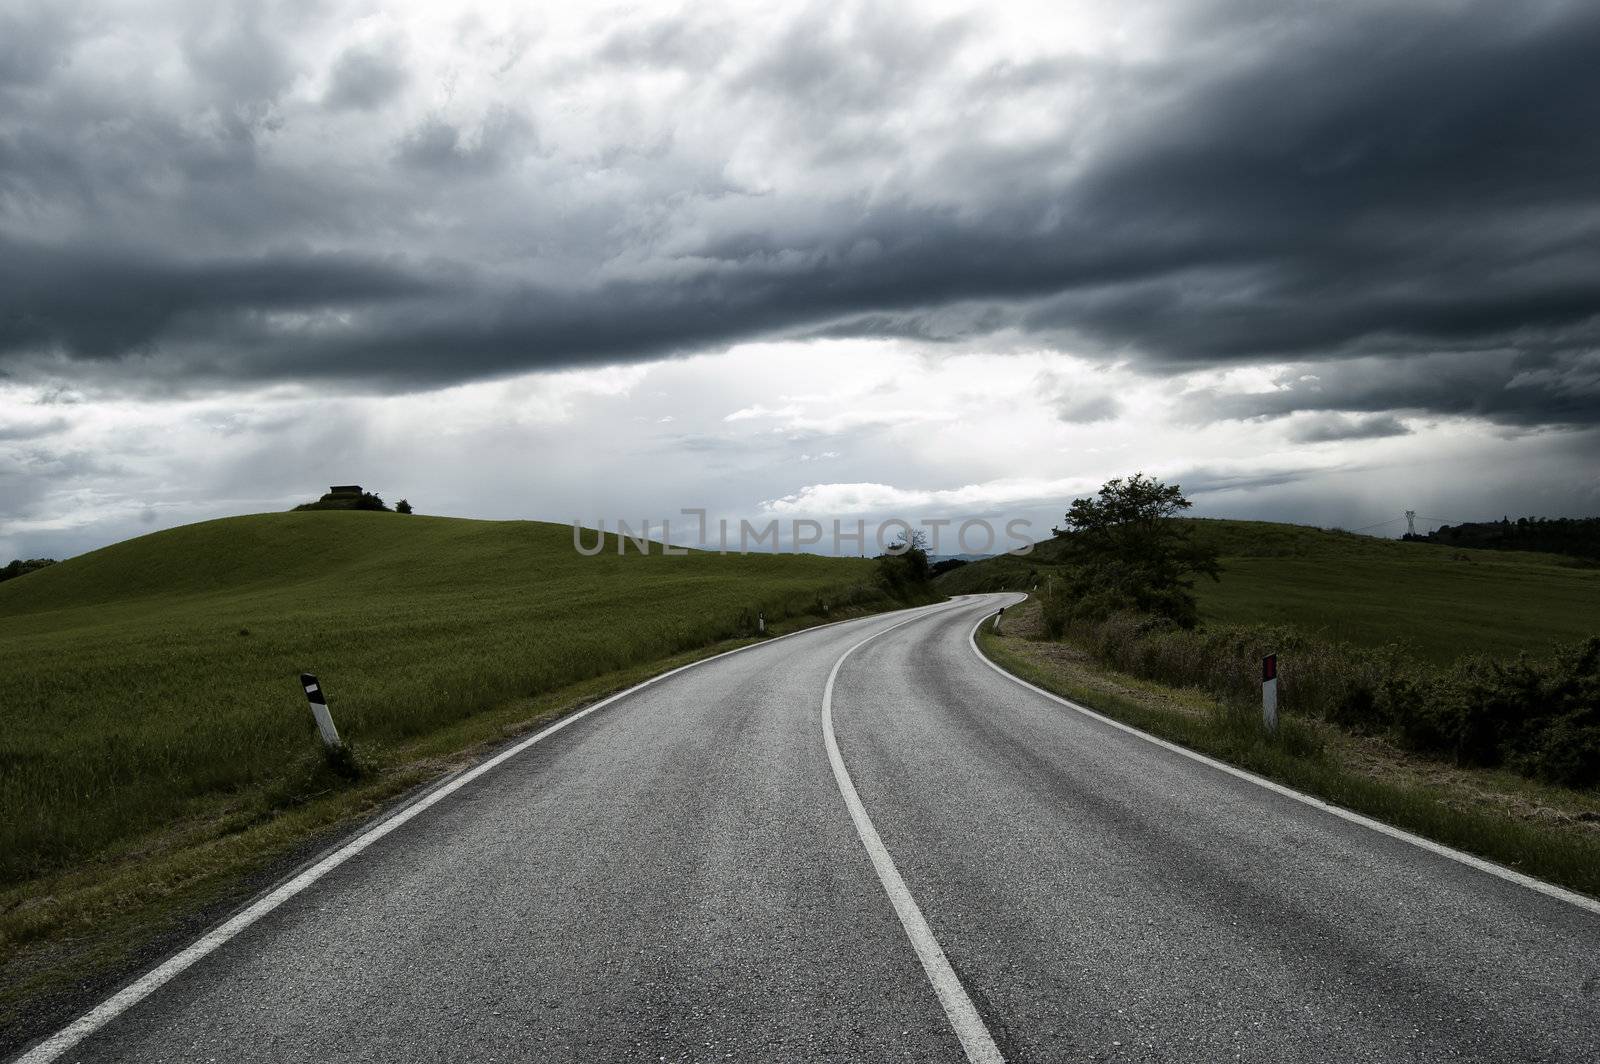 Road between fields under a cloudly sky